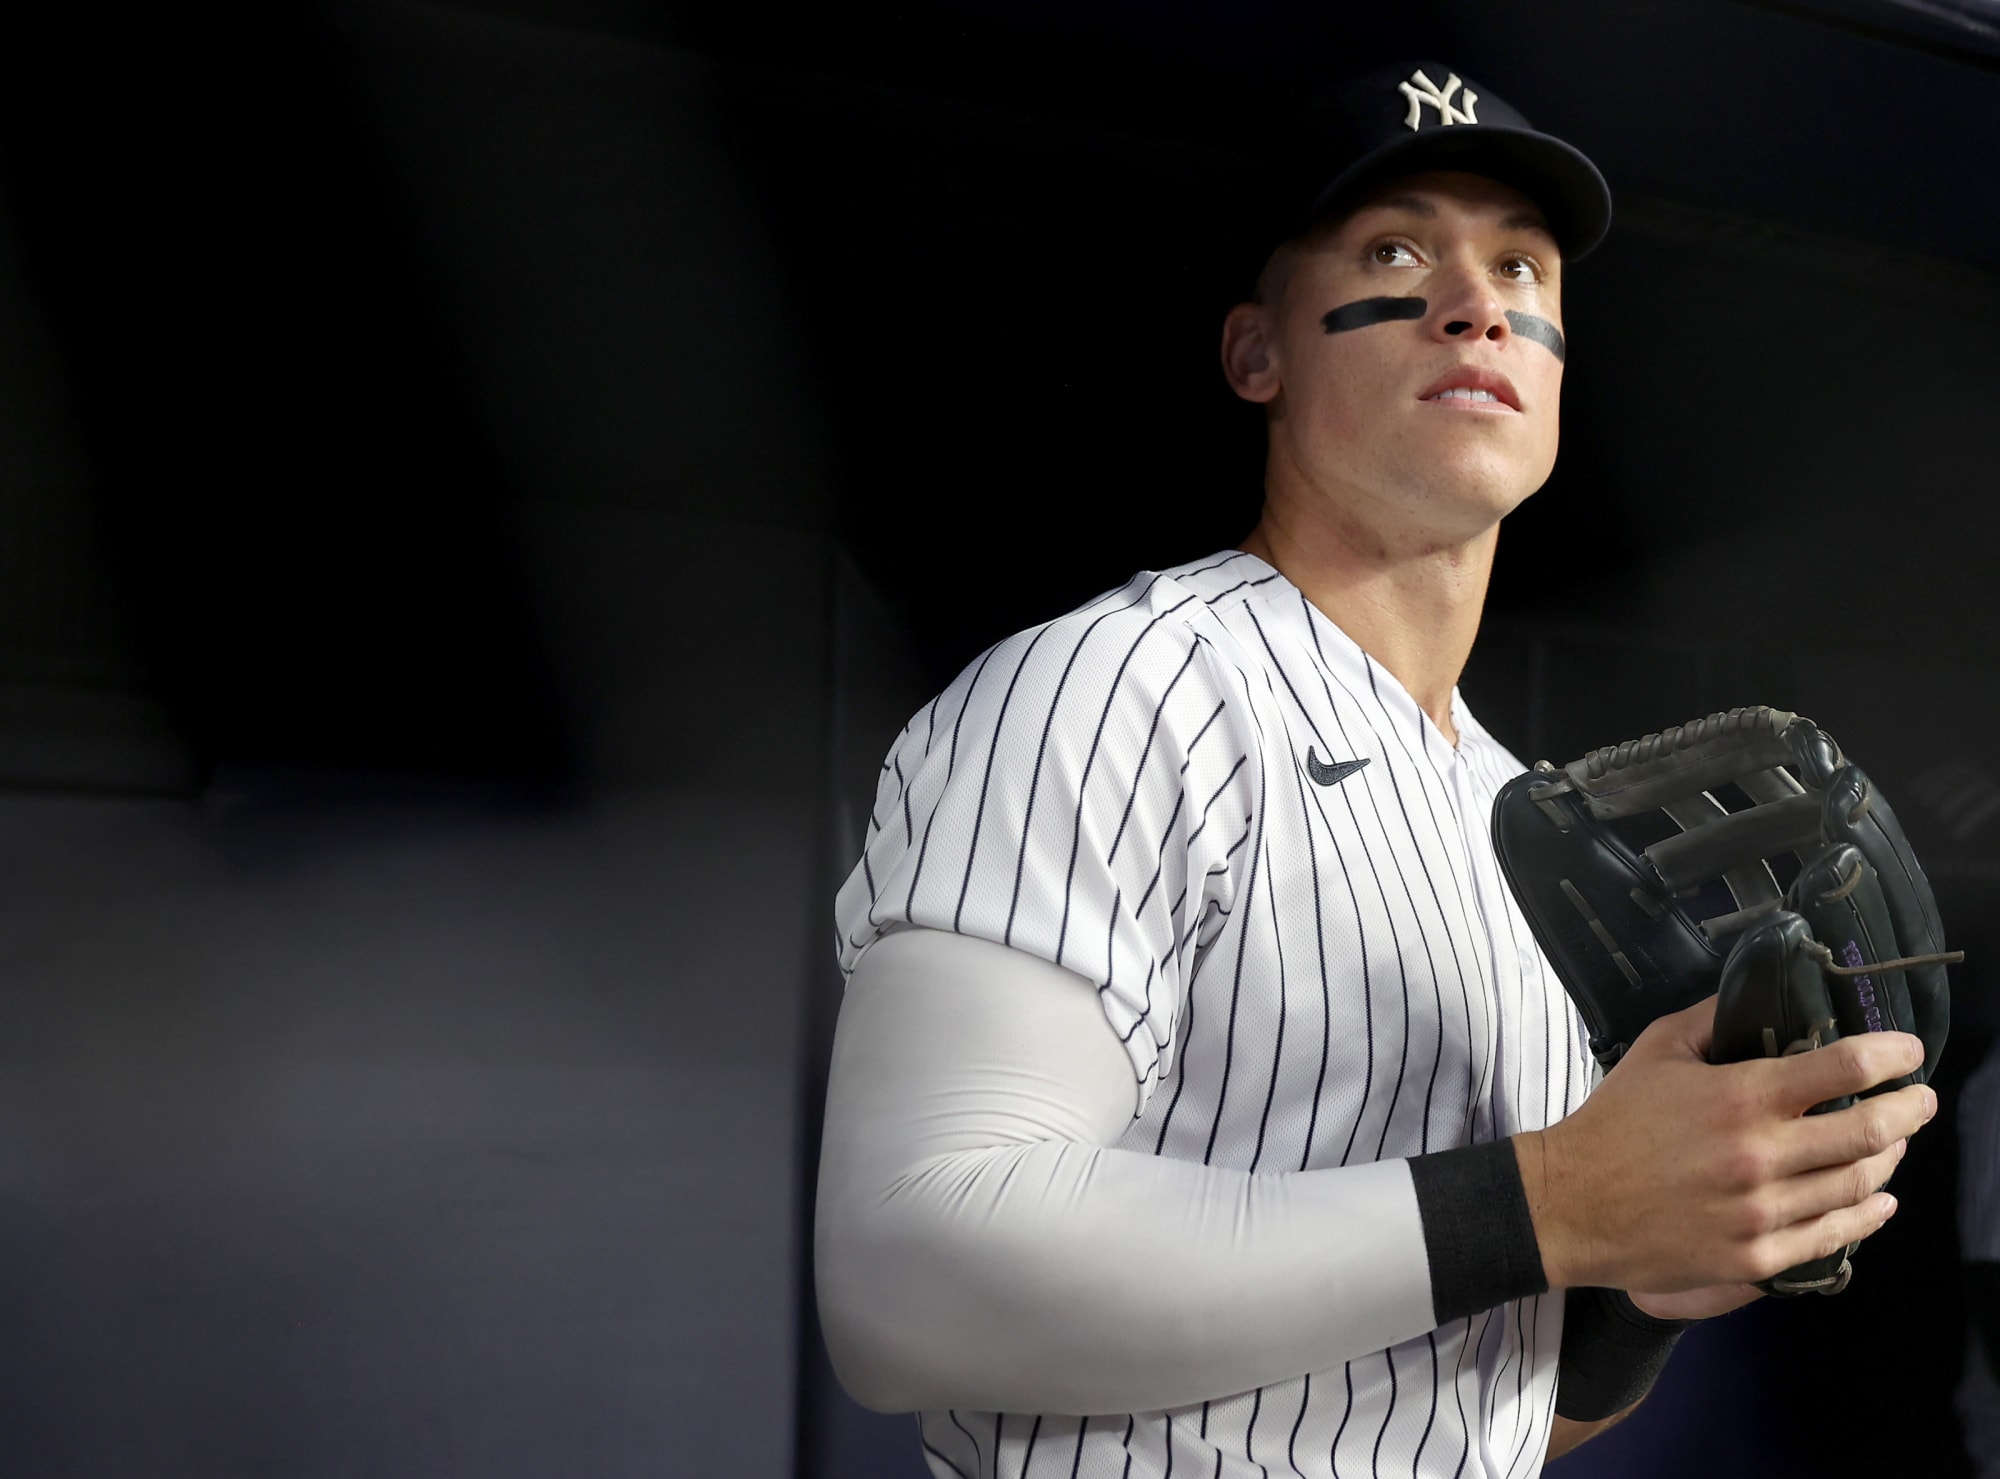 Could Aaron Judge sign with the Red Sox this offseason? – NBC